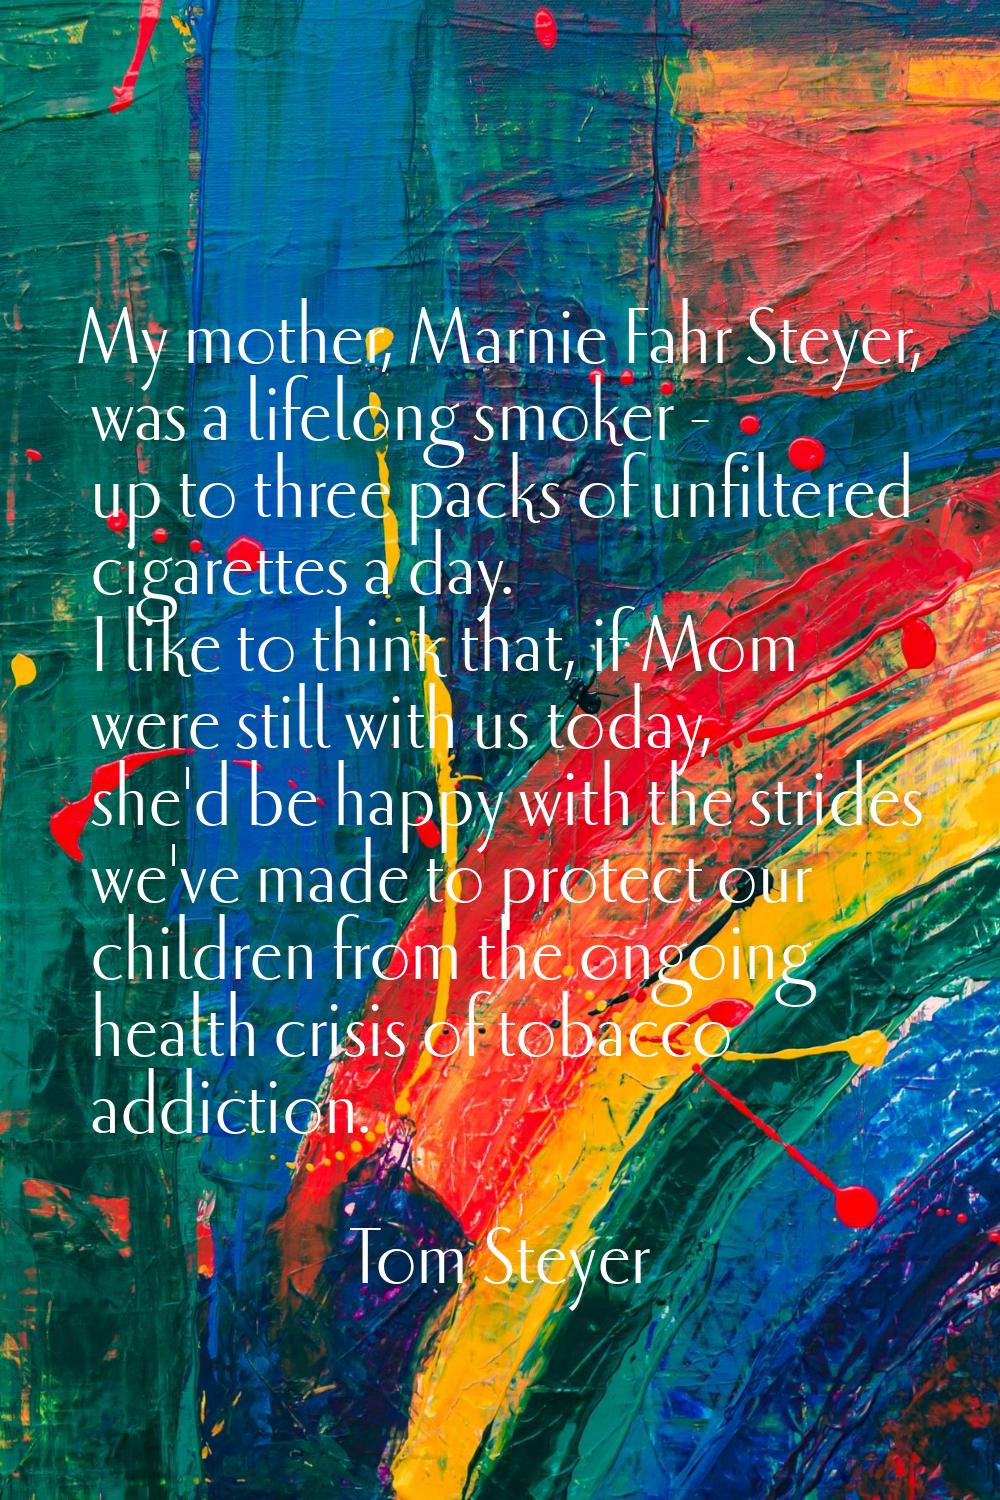 My mother, Marnie Fahr Steyer, was a lifelong smoker - up to three packs of unfiltered cigarettes a